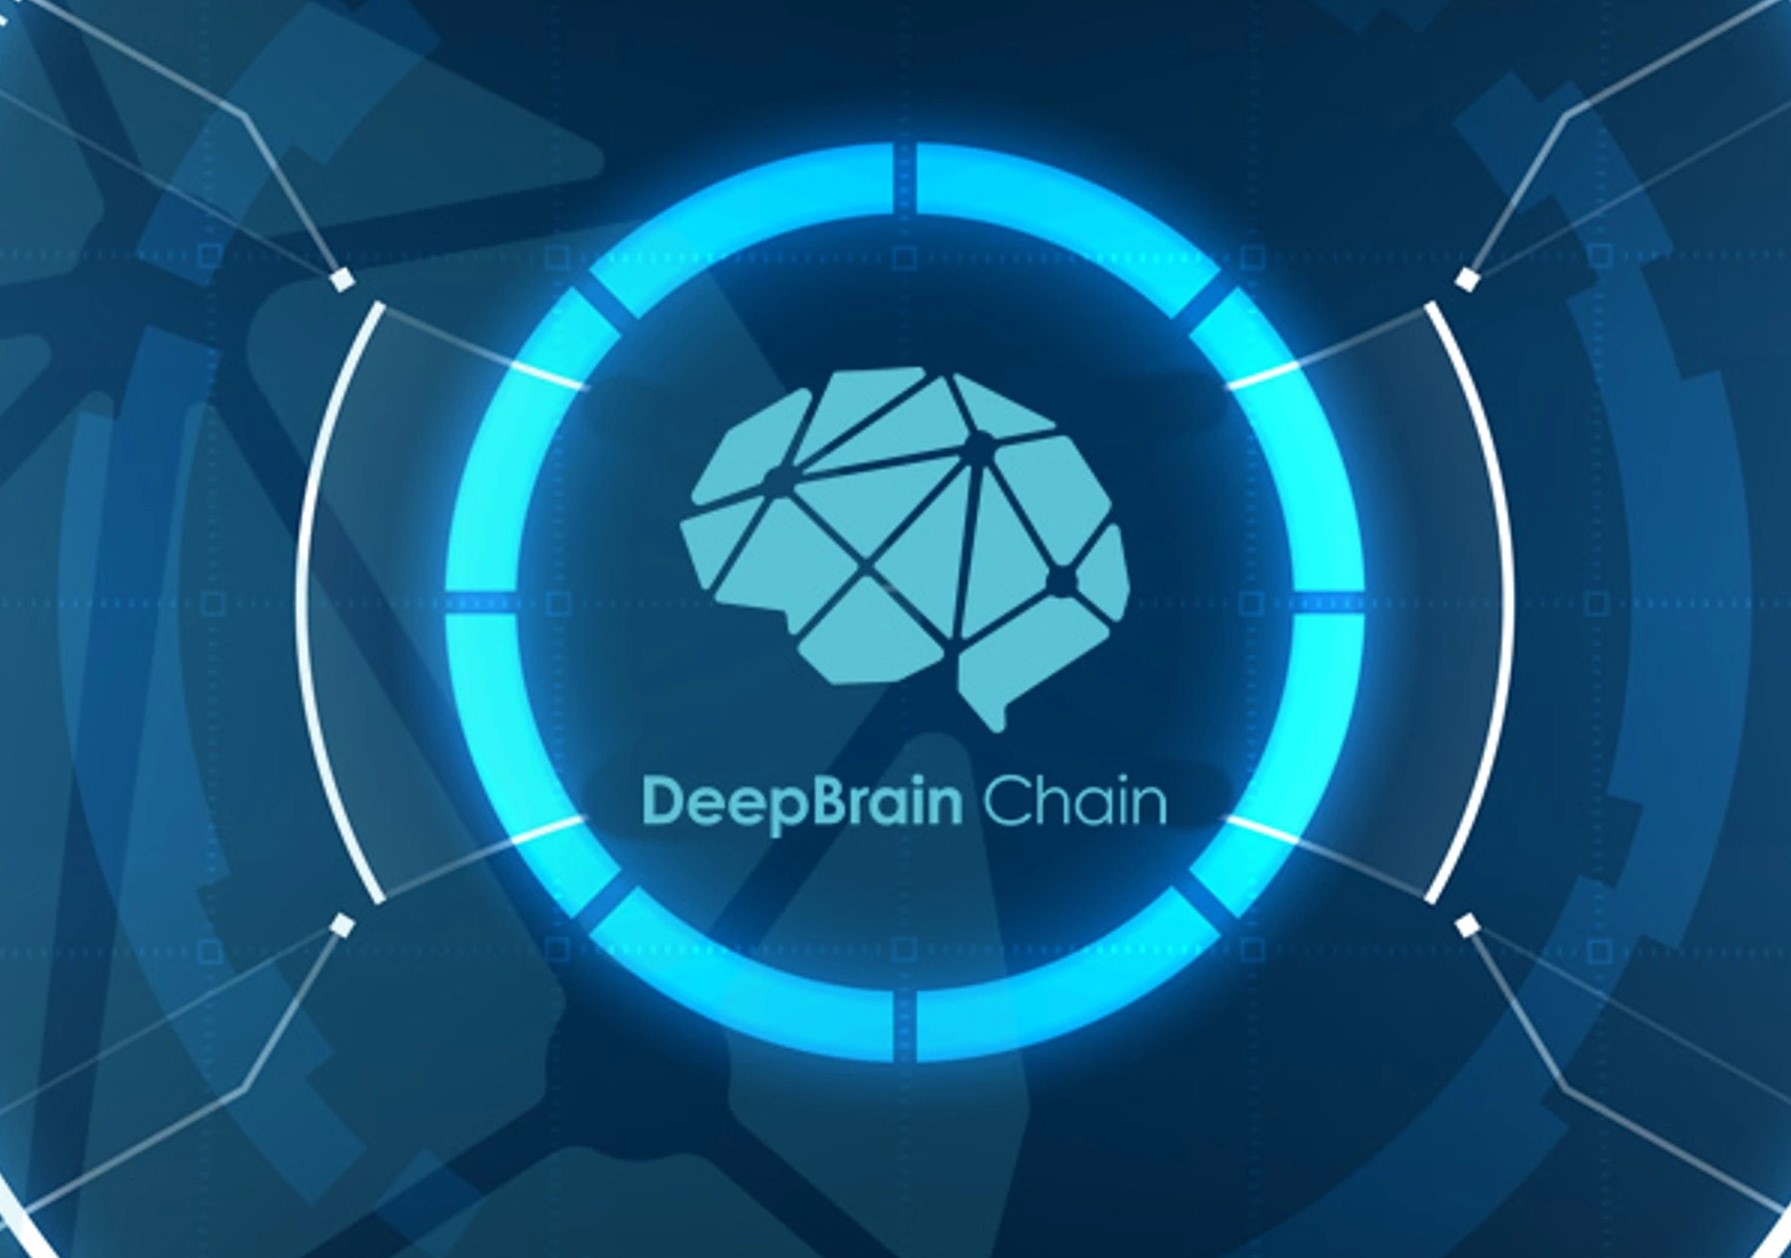 13-intriguing-facts-about-deepbrain-chain-dbc